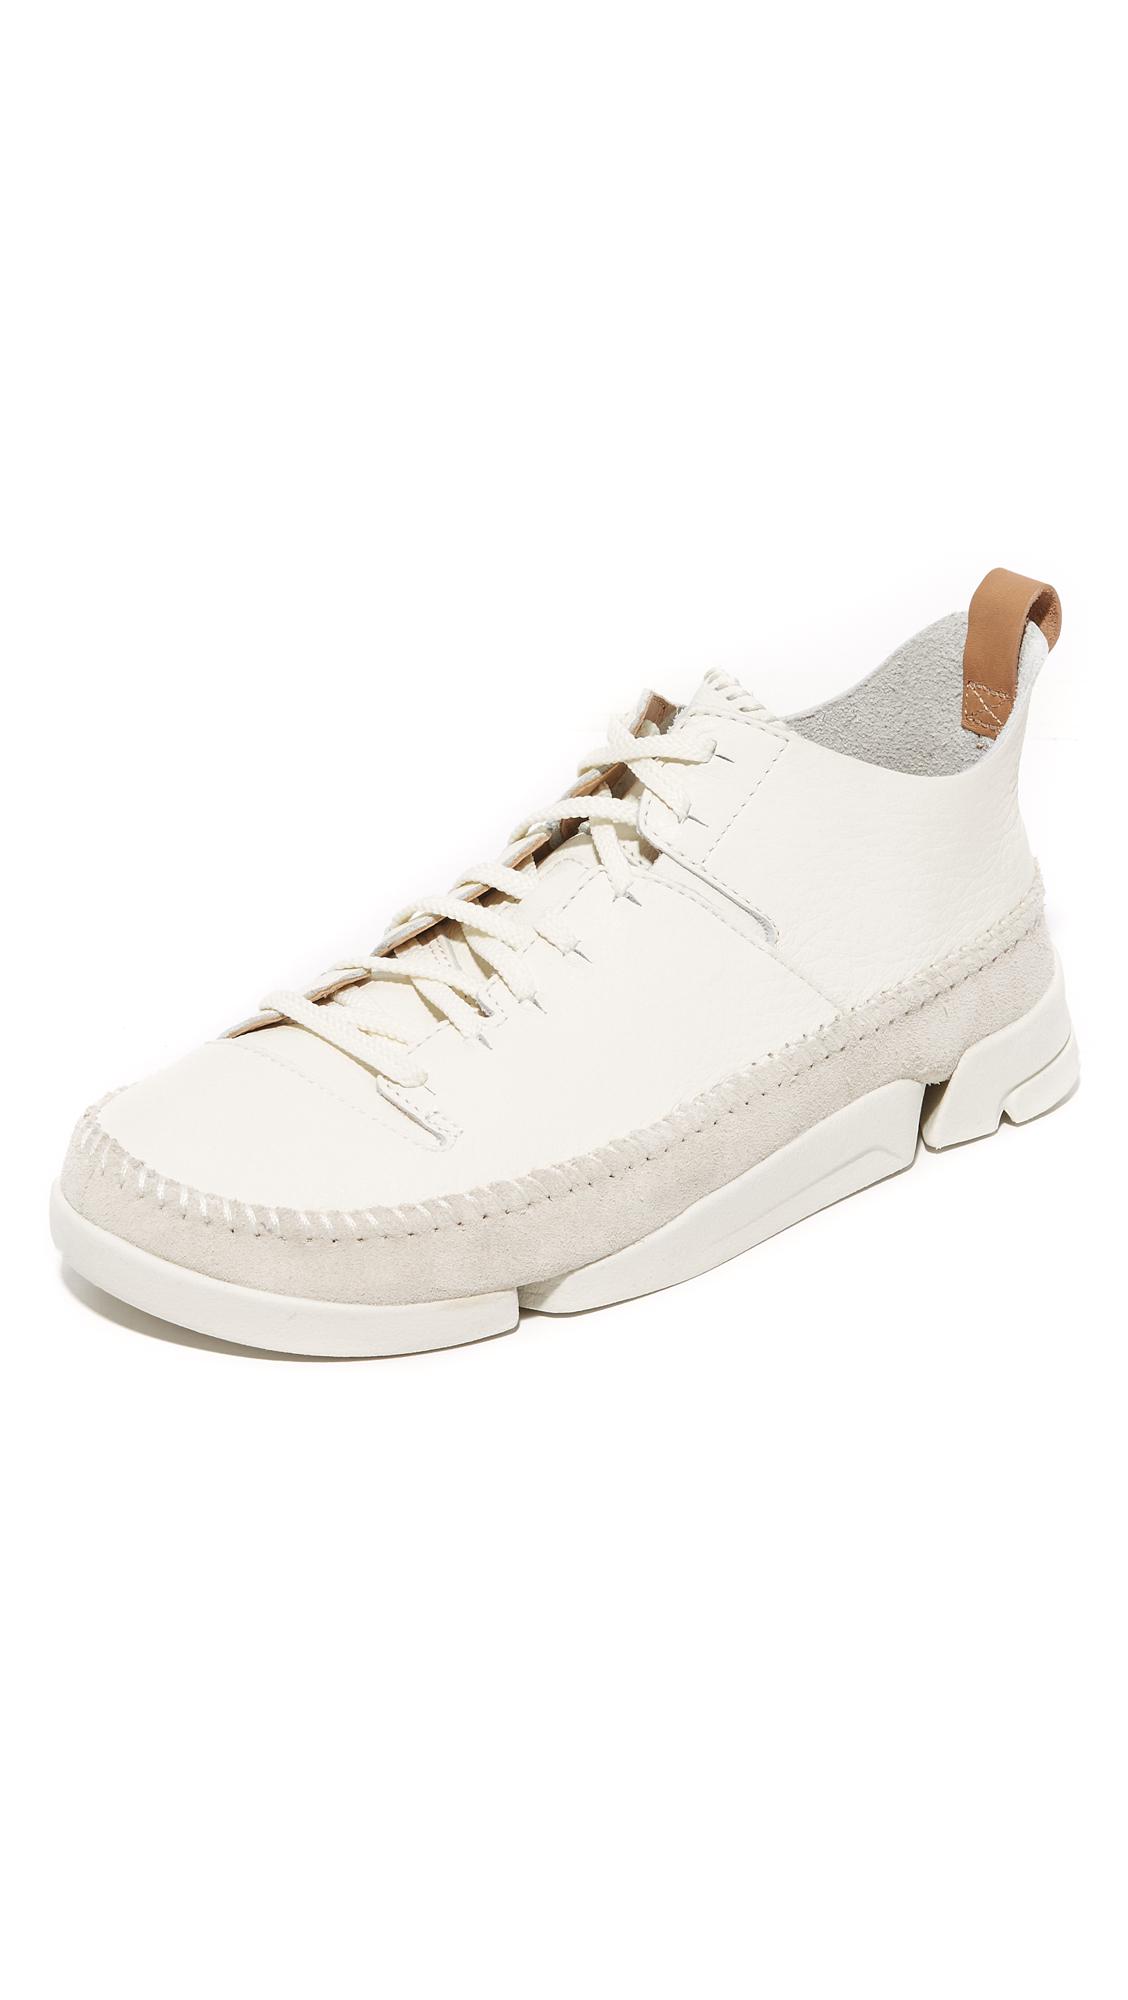 Clarks Leather Trigenic Flex Trainers In White for Men - Lyst